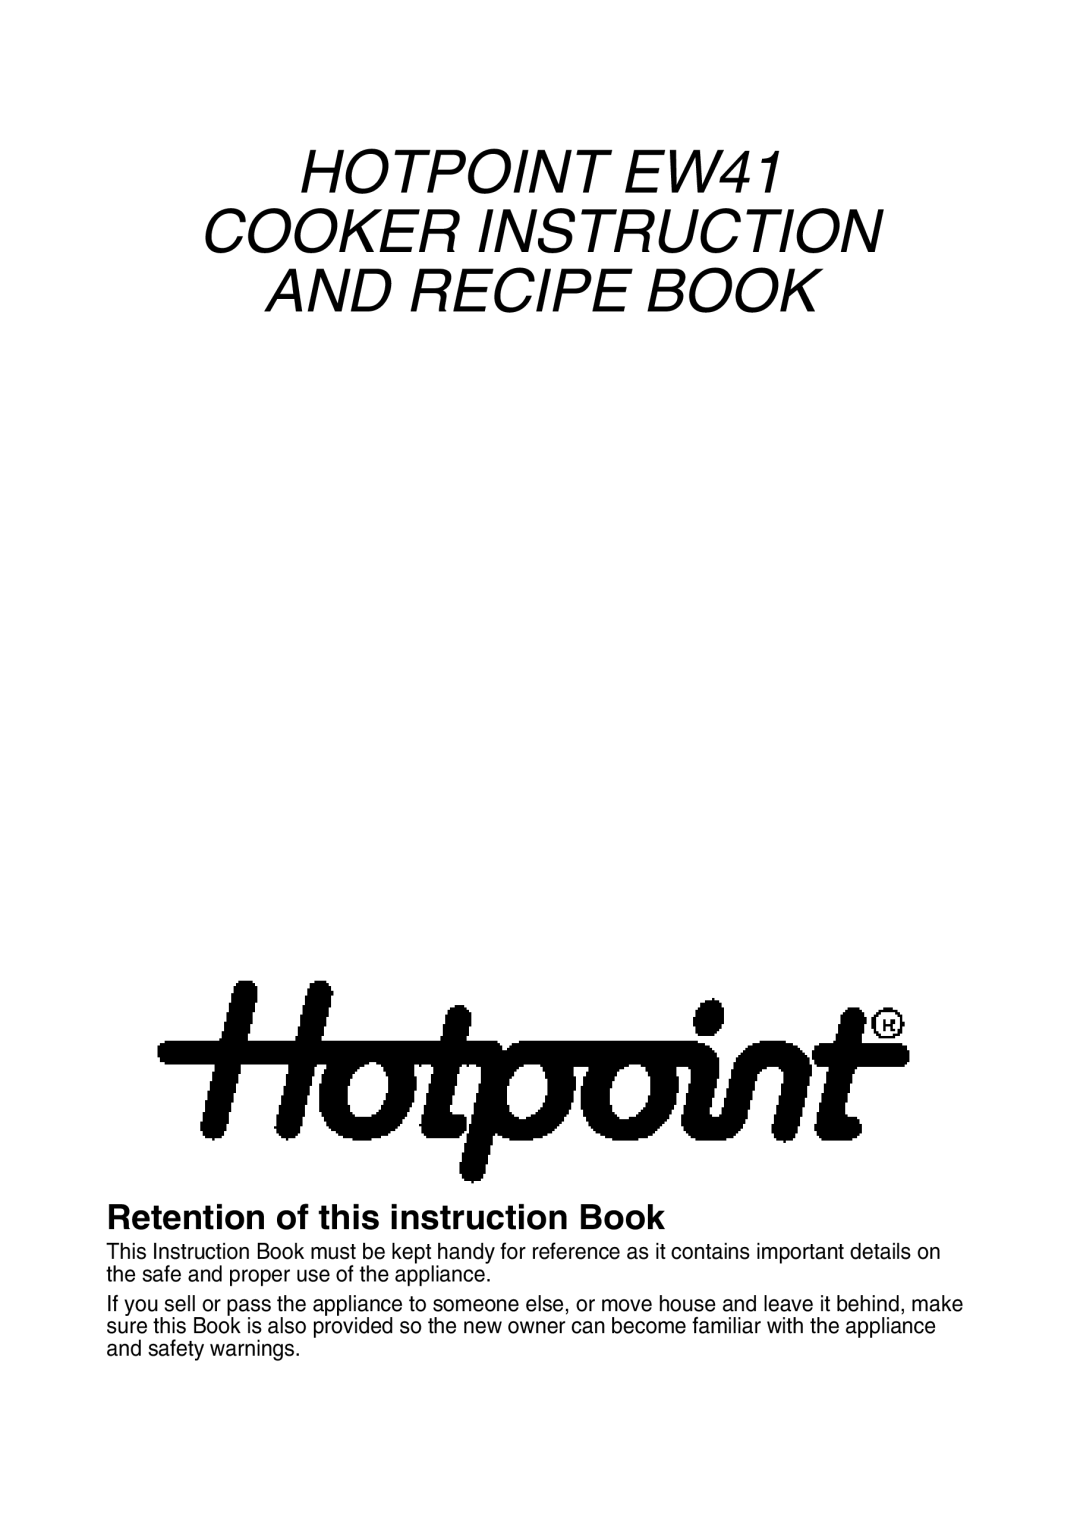 Hotpoint manual Retention of this instruction Book, HOTPOINT EW41 COOKER INSTRUCTION AND RECIPE BOOK 